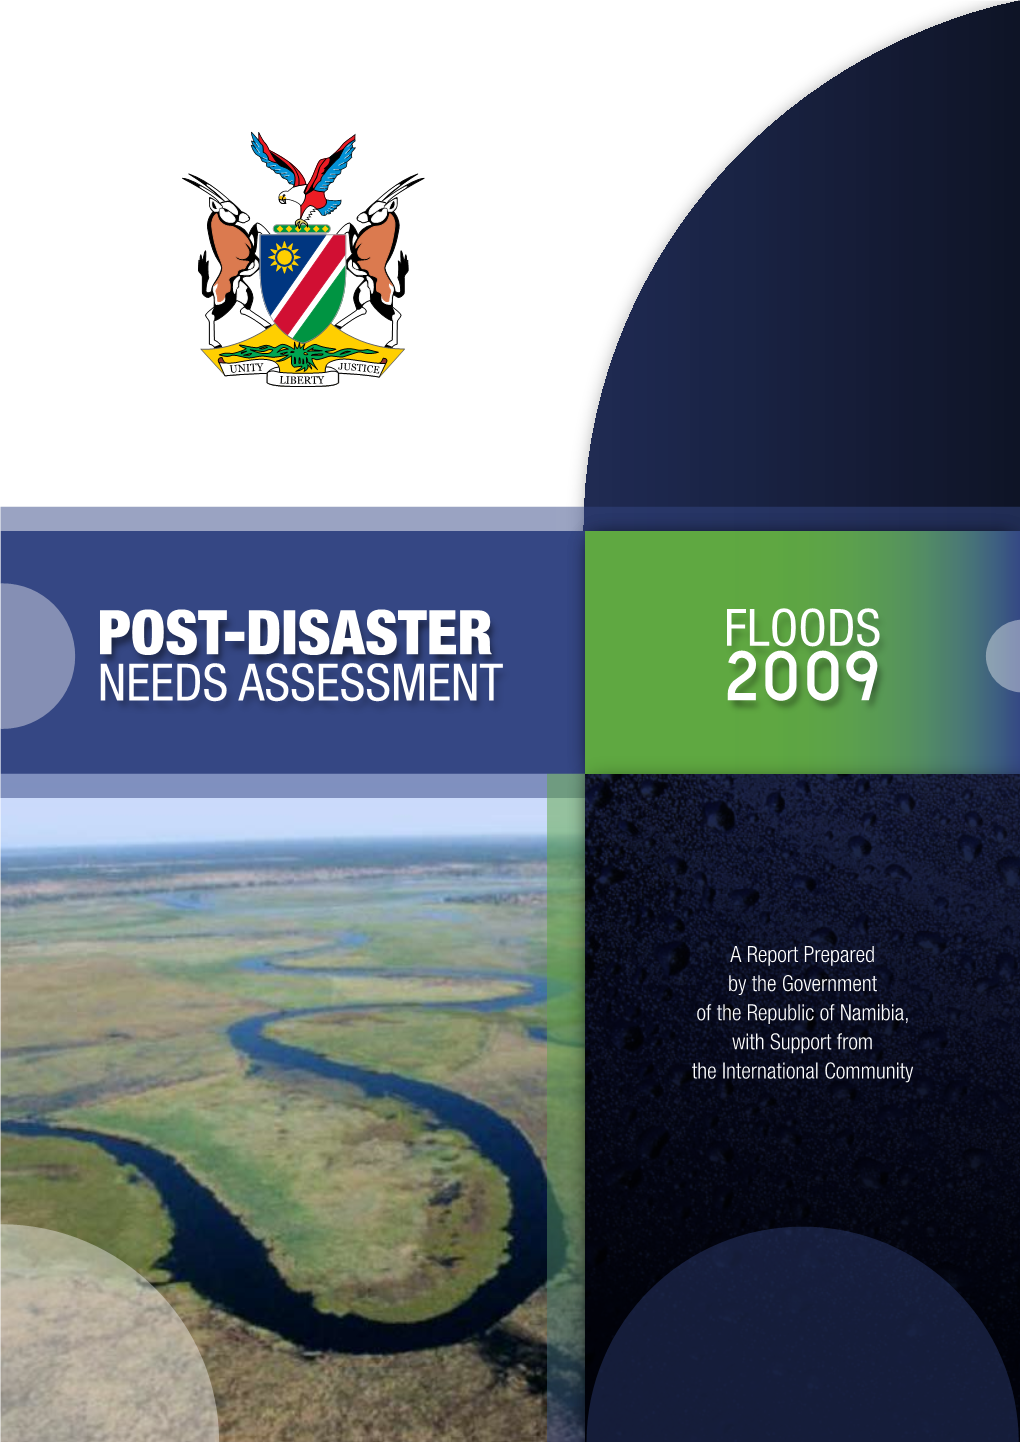 Namibia, with Support from the International Community POST-DISASTER FLOODS NEEDS ASSESSMENT 2009